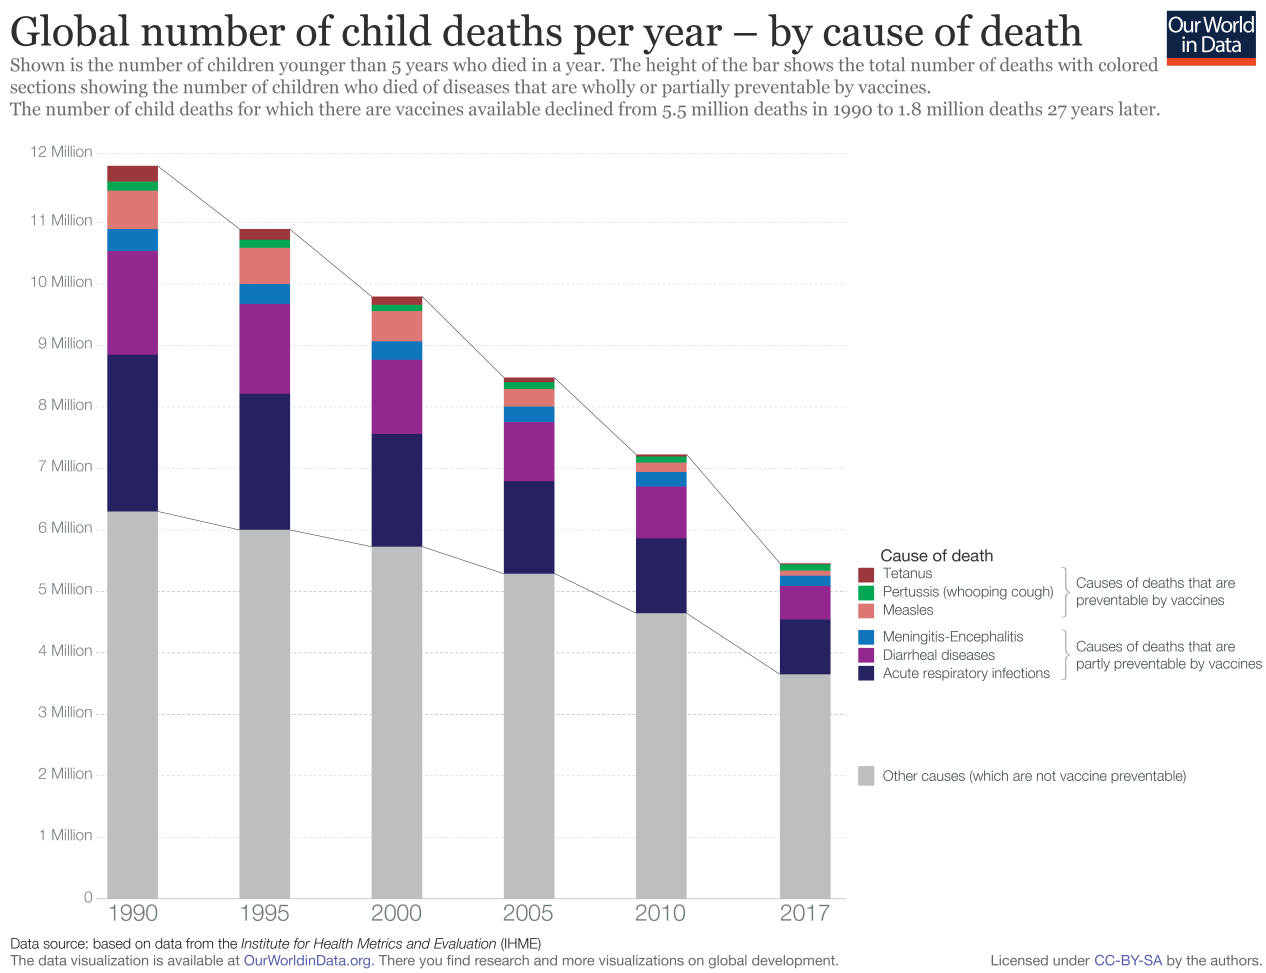 Reduction-of-child-deaths-due-to-vaccine-preventable-diseases-2019